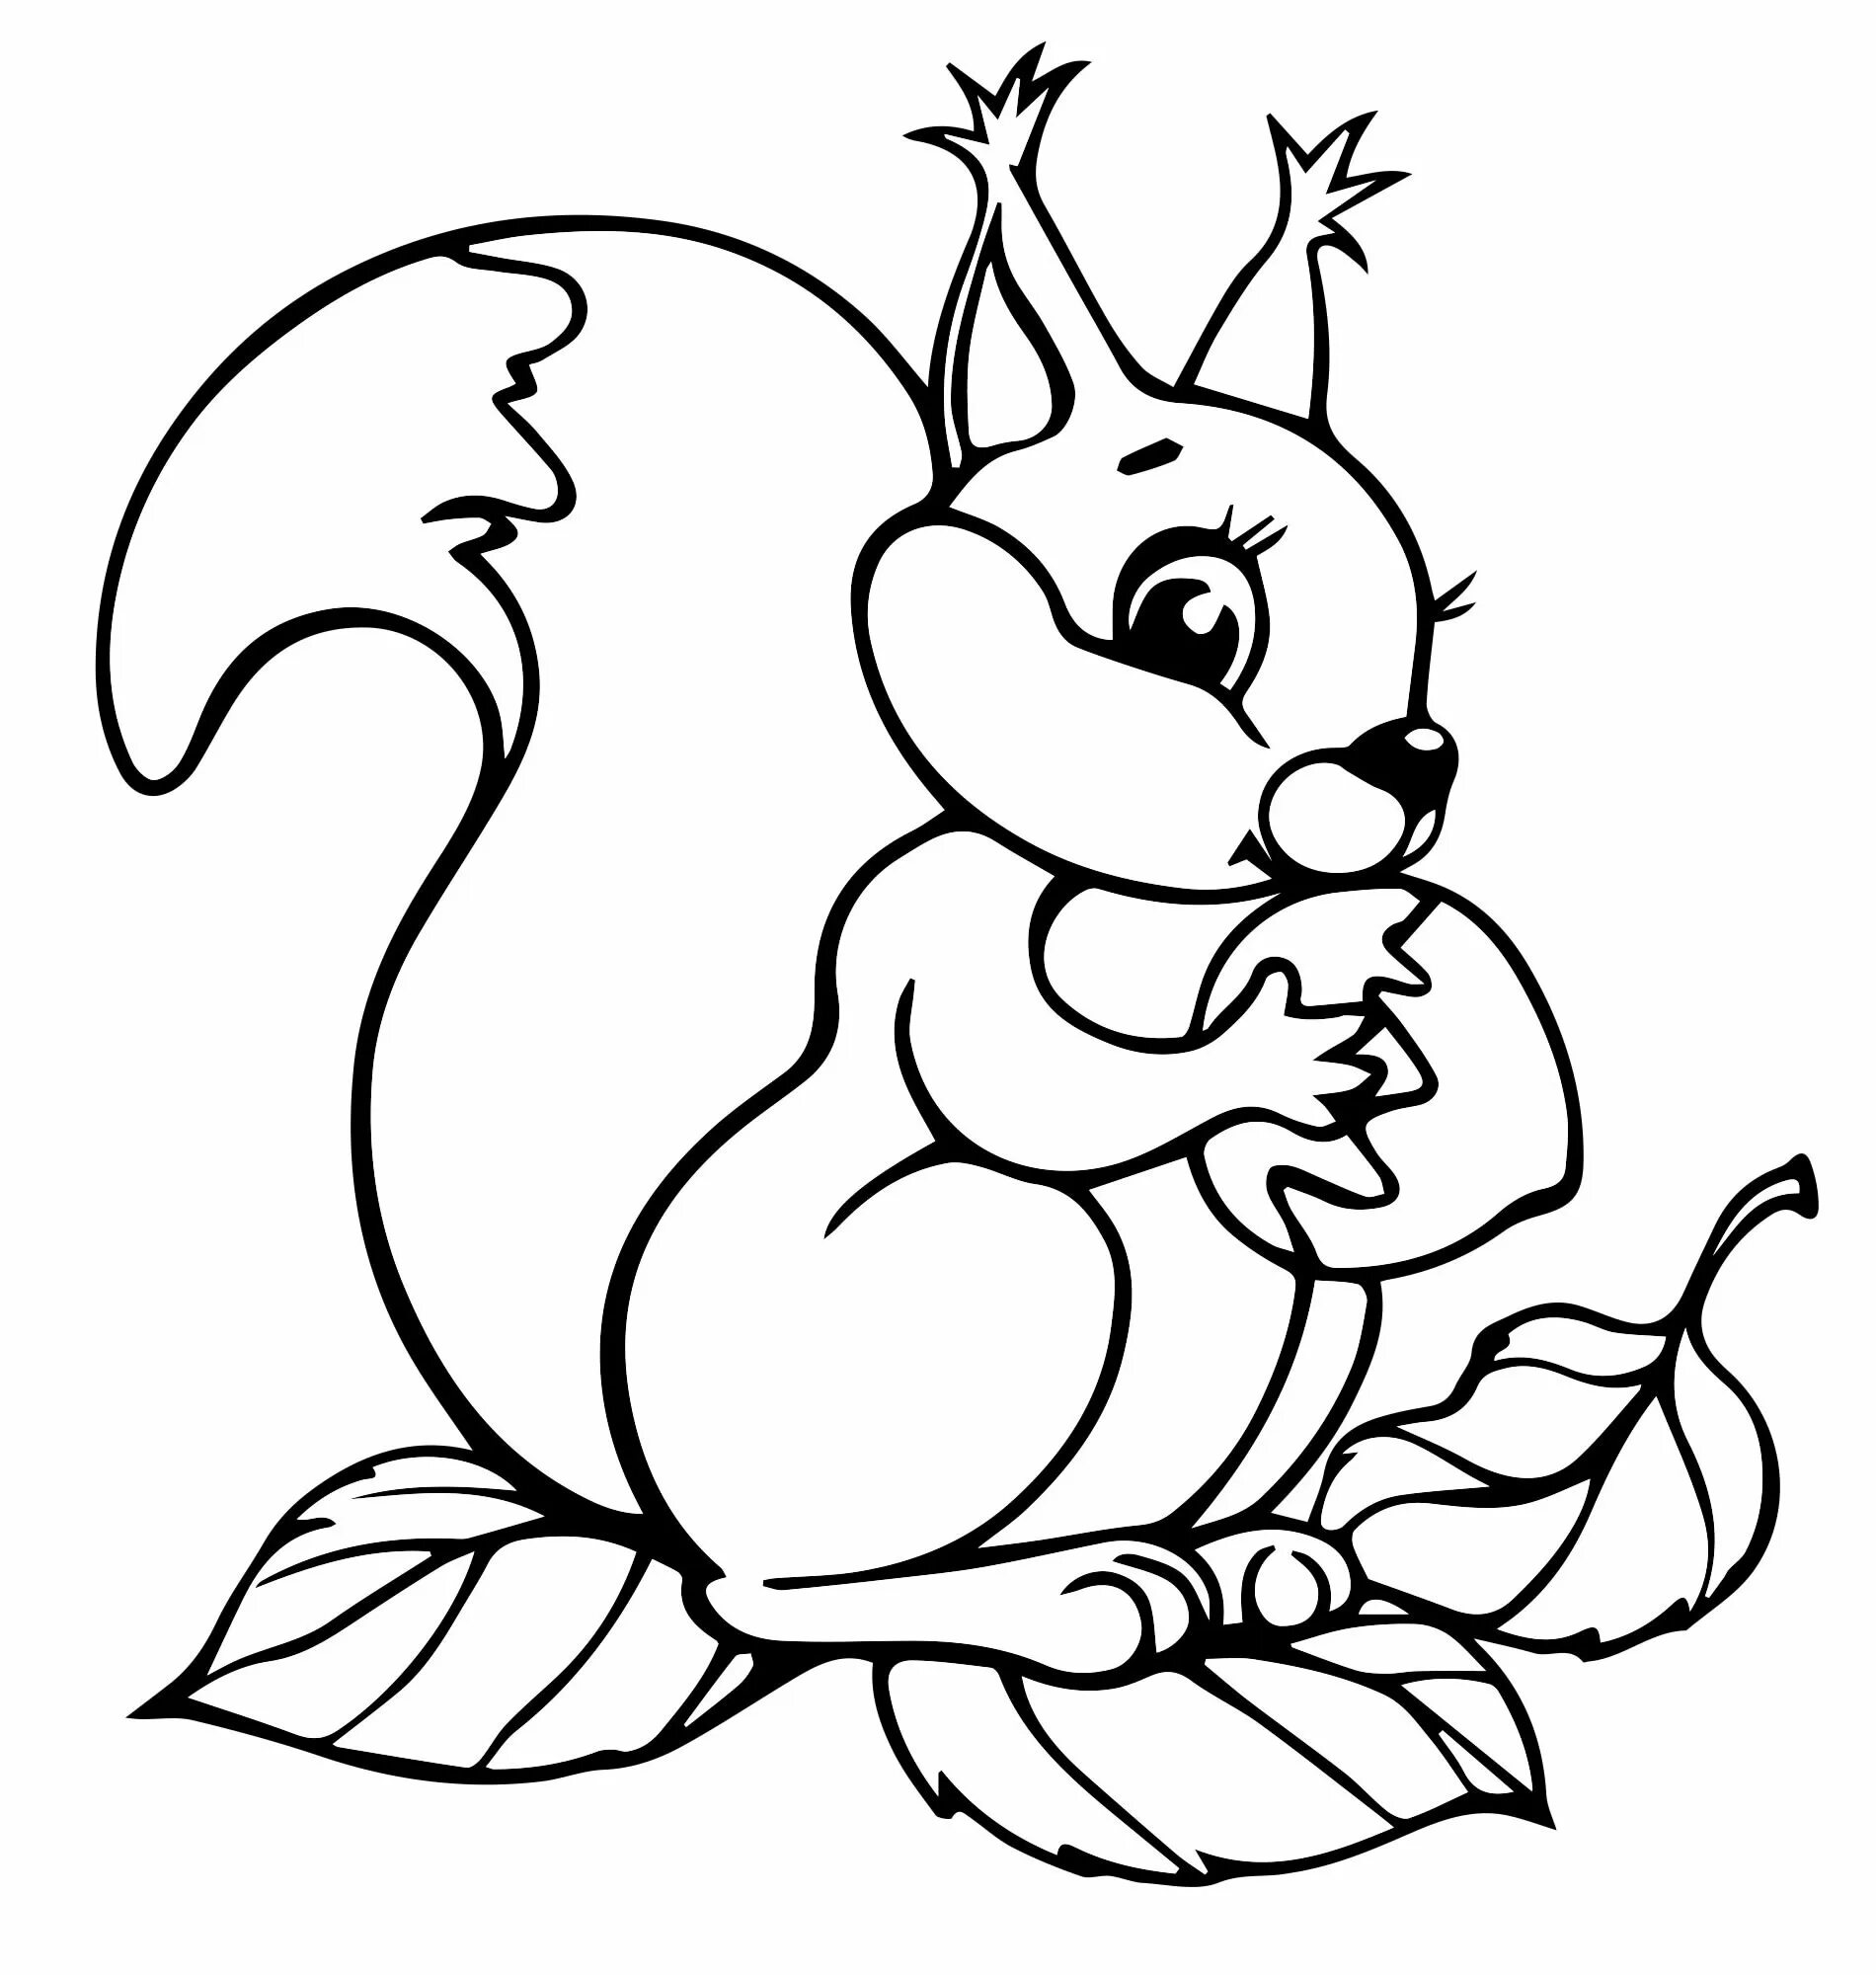 Fun coloring pages nuts for squirrels for kids